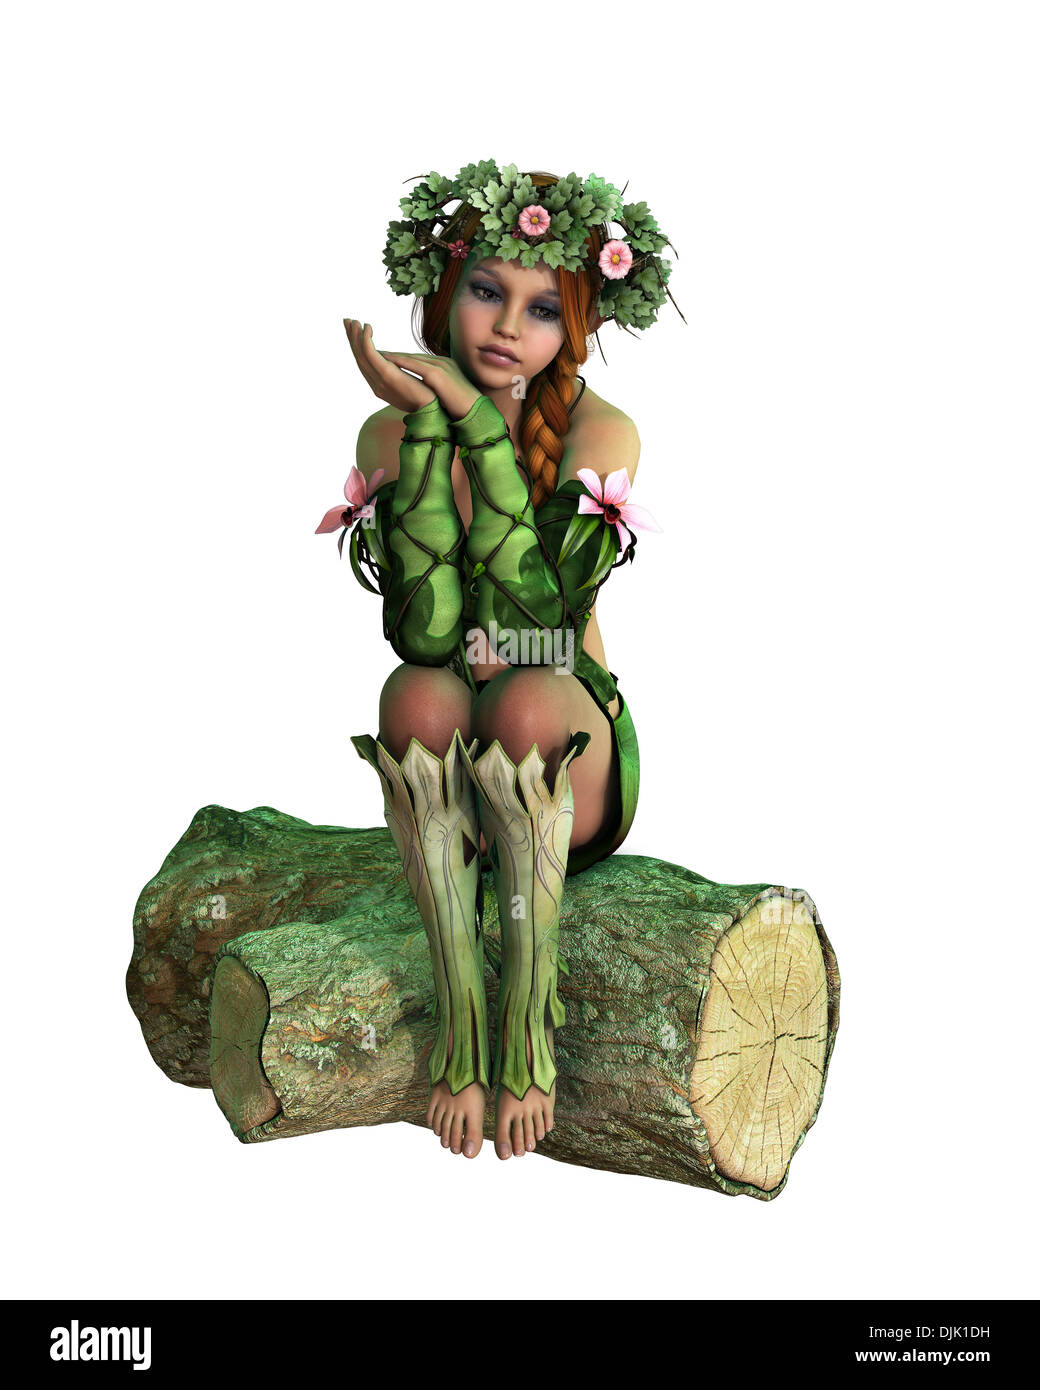 3D computer graphics of a girl with a wreath on her head, sitting on a tree stump Stock Photo